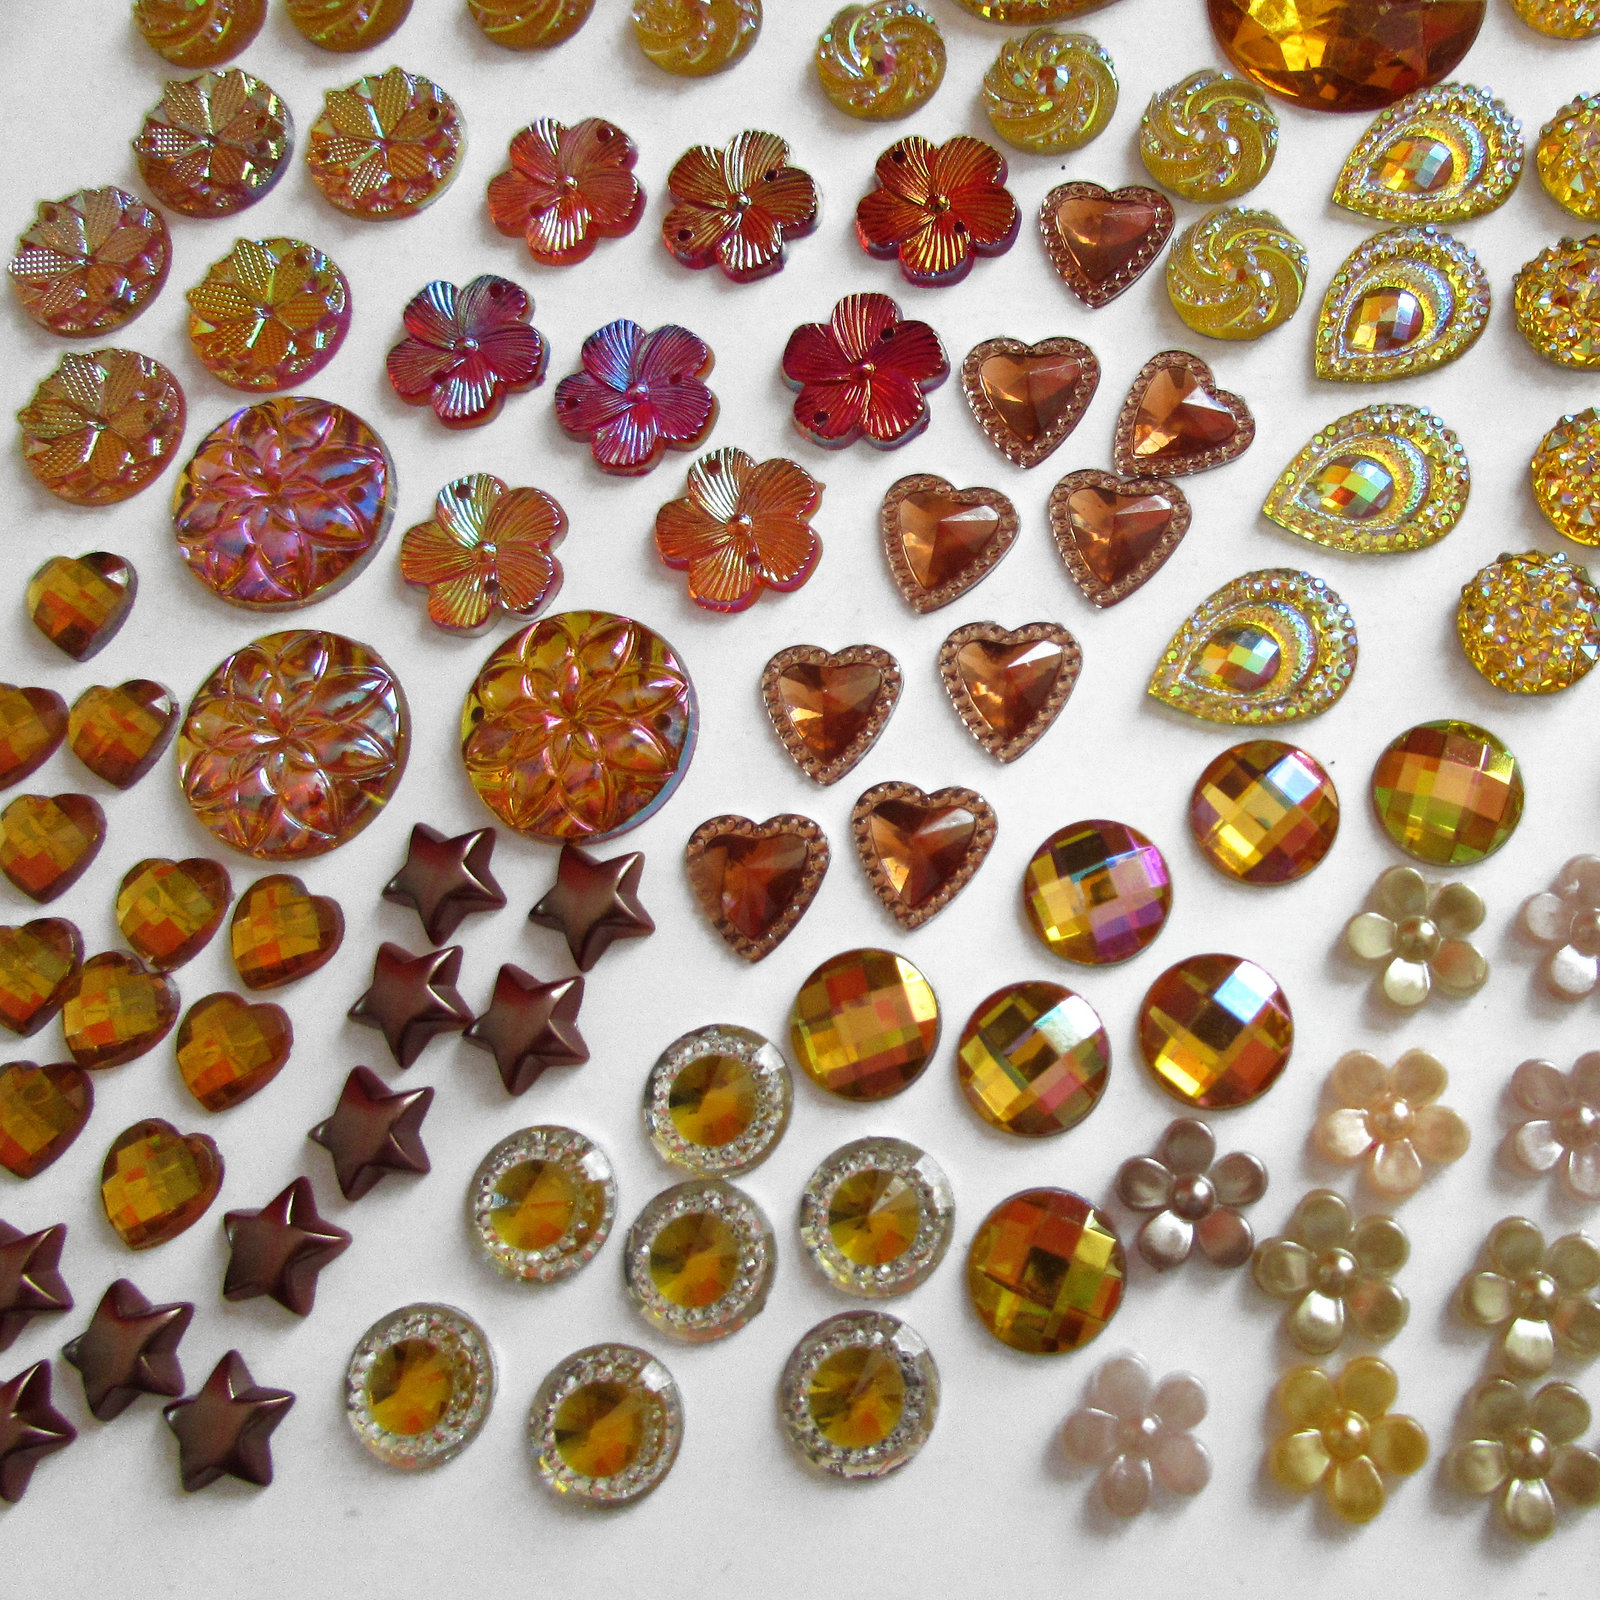 400 Pcs of Assorted Amber Pearl Finish, Irridescent Flat Back Tear Drop Beads...